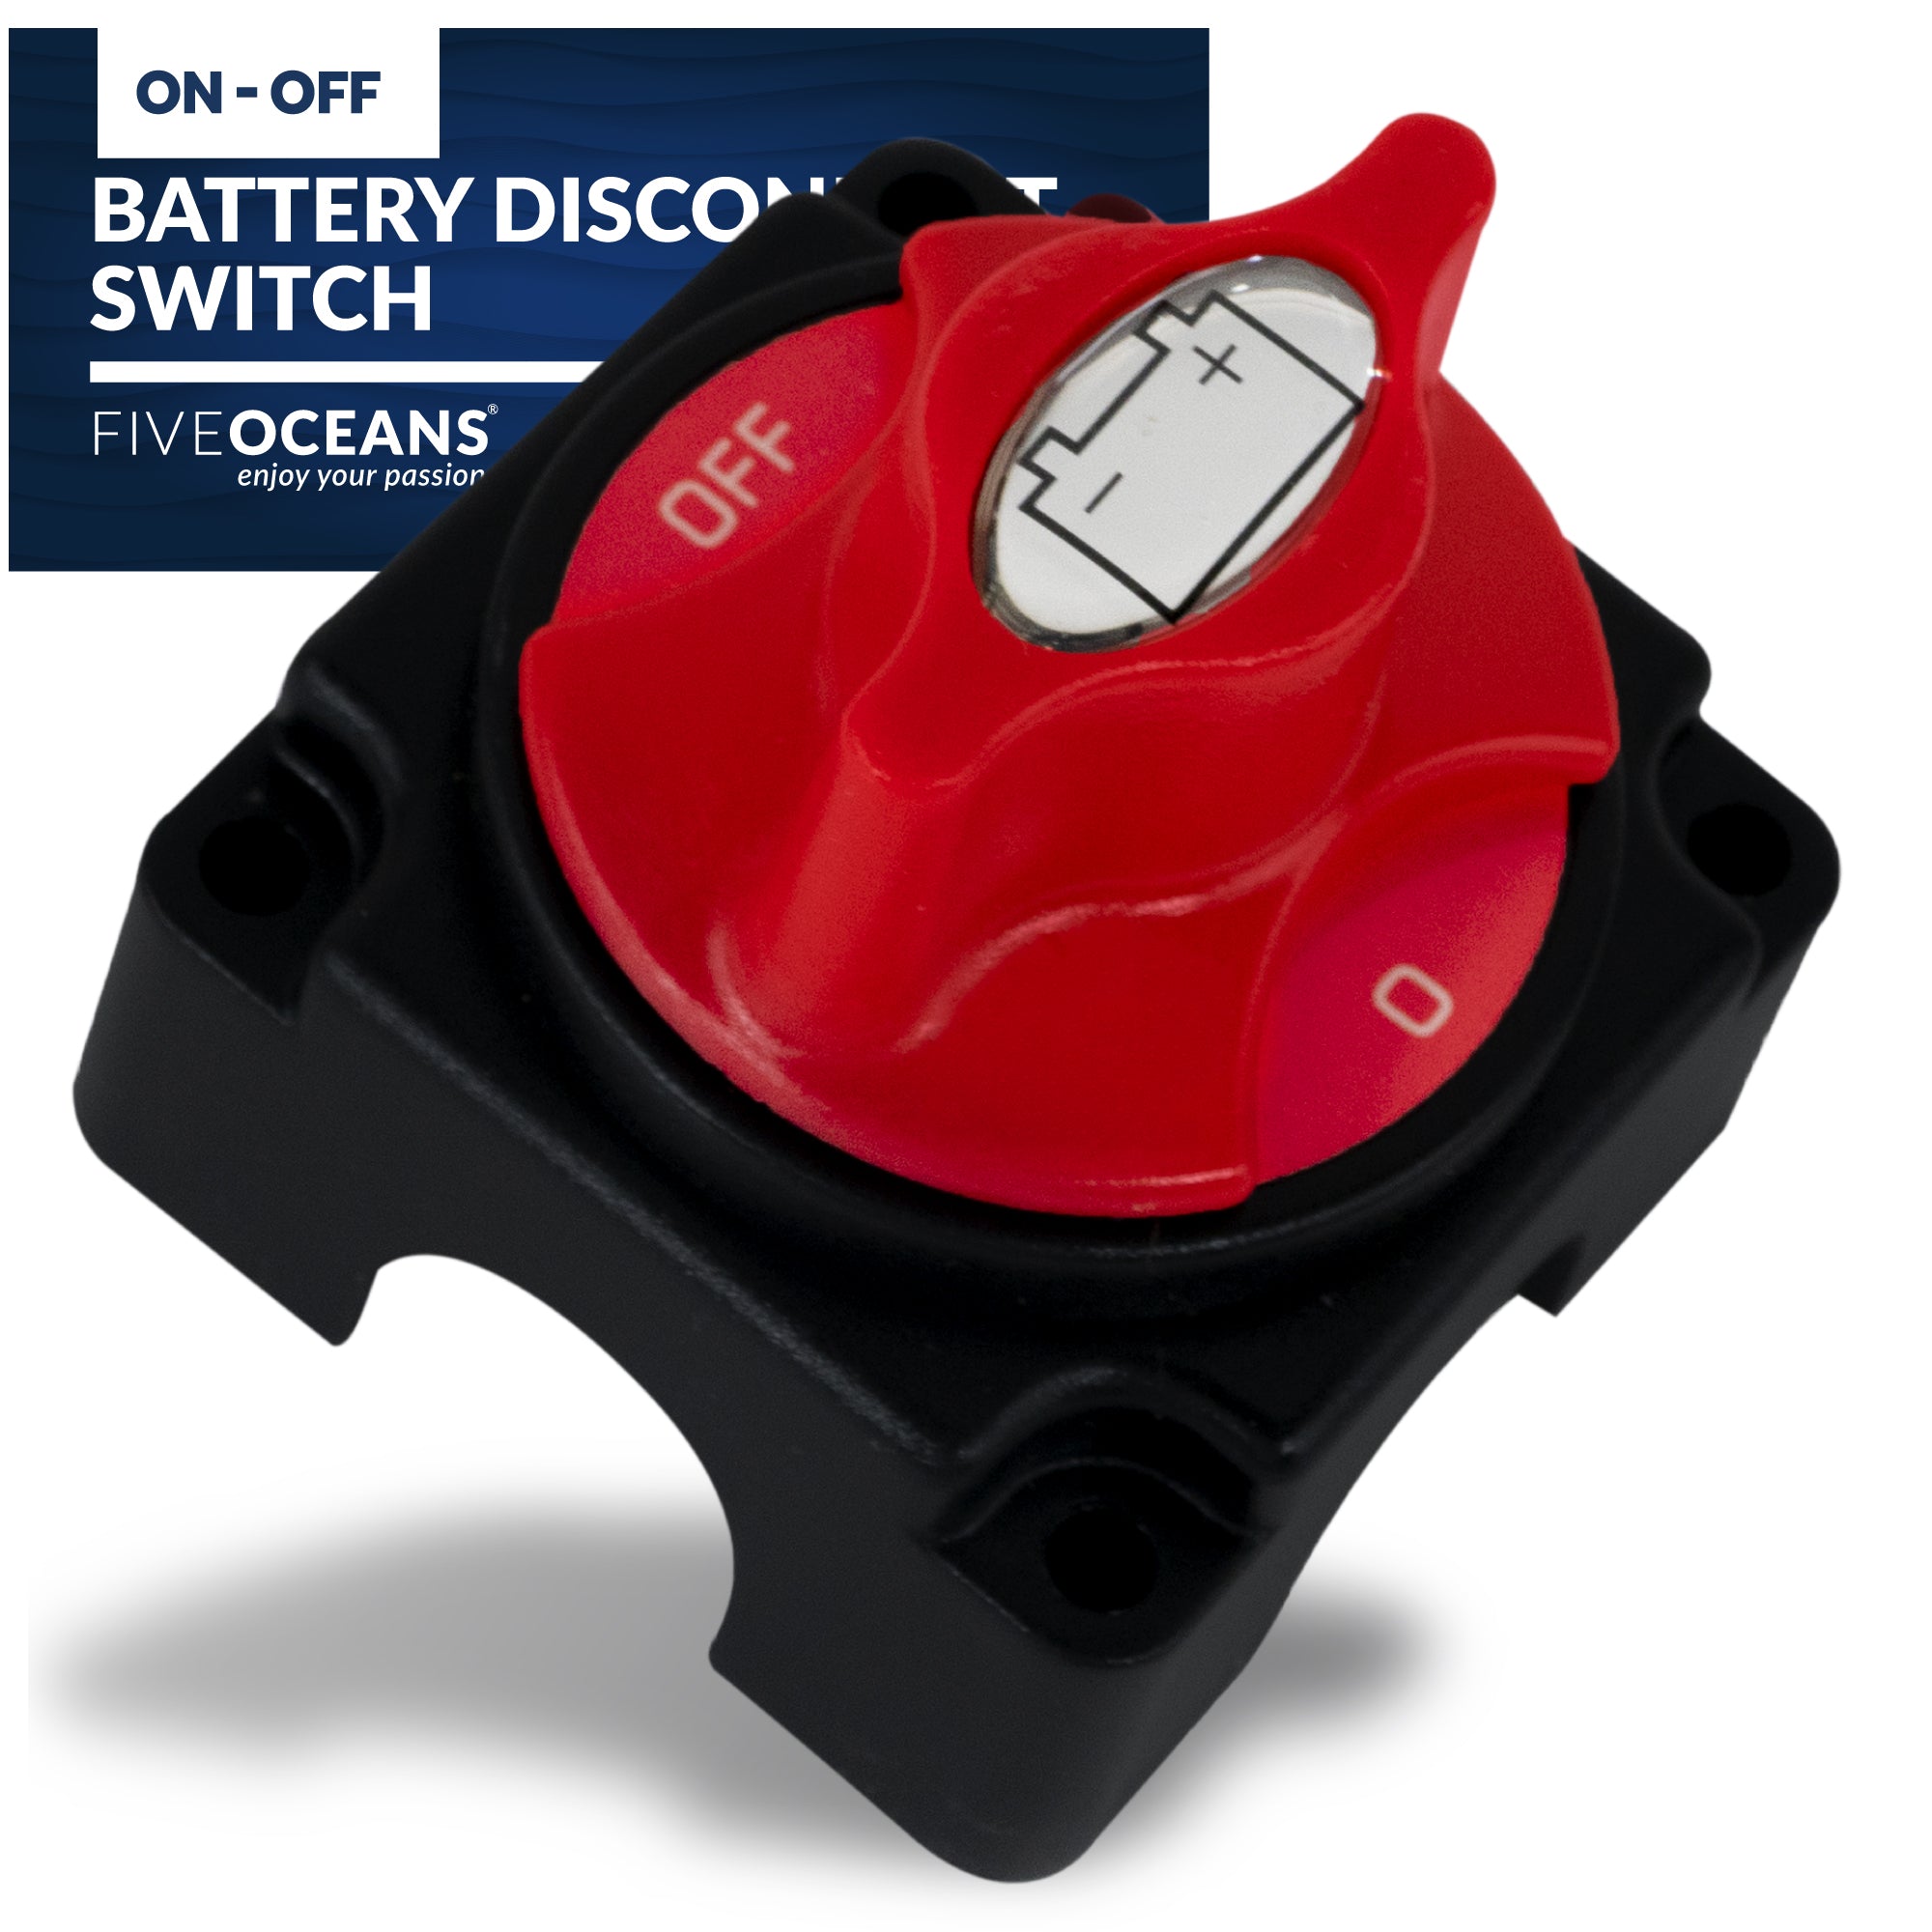 Battery Disconnect Switch On-Off, 250 Amp, 12-24 Volts - FO3510